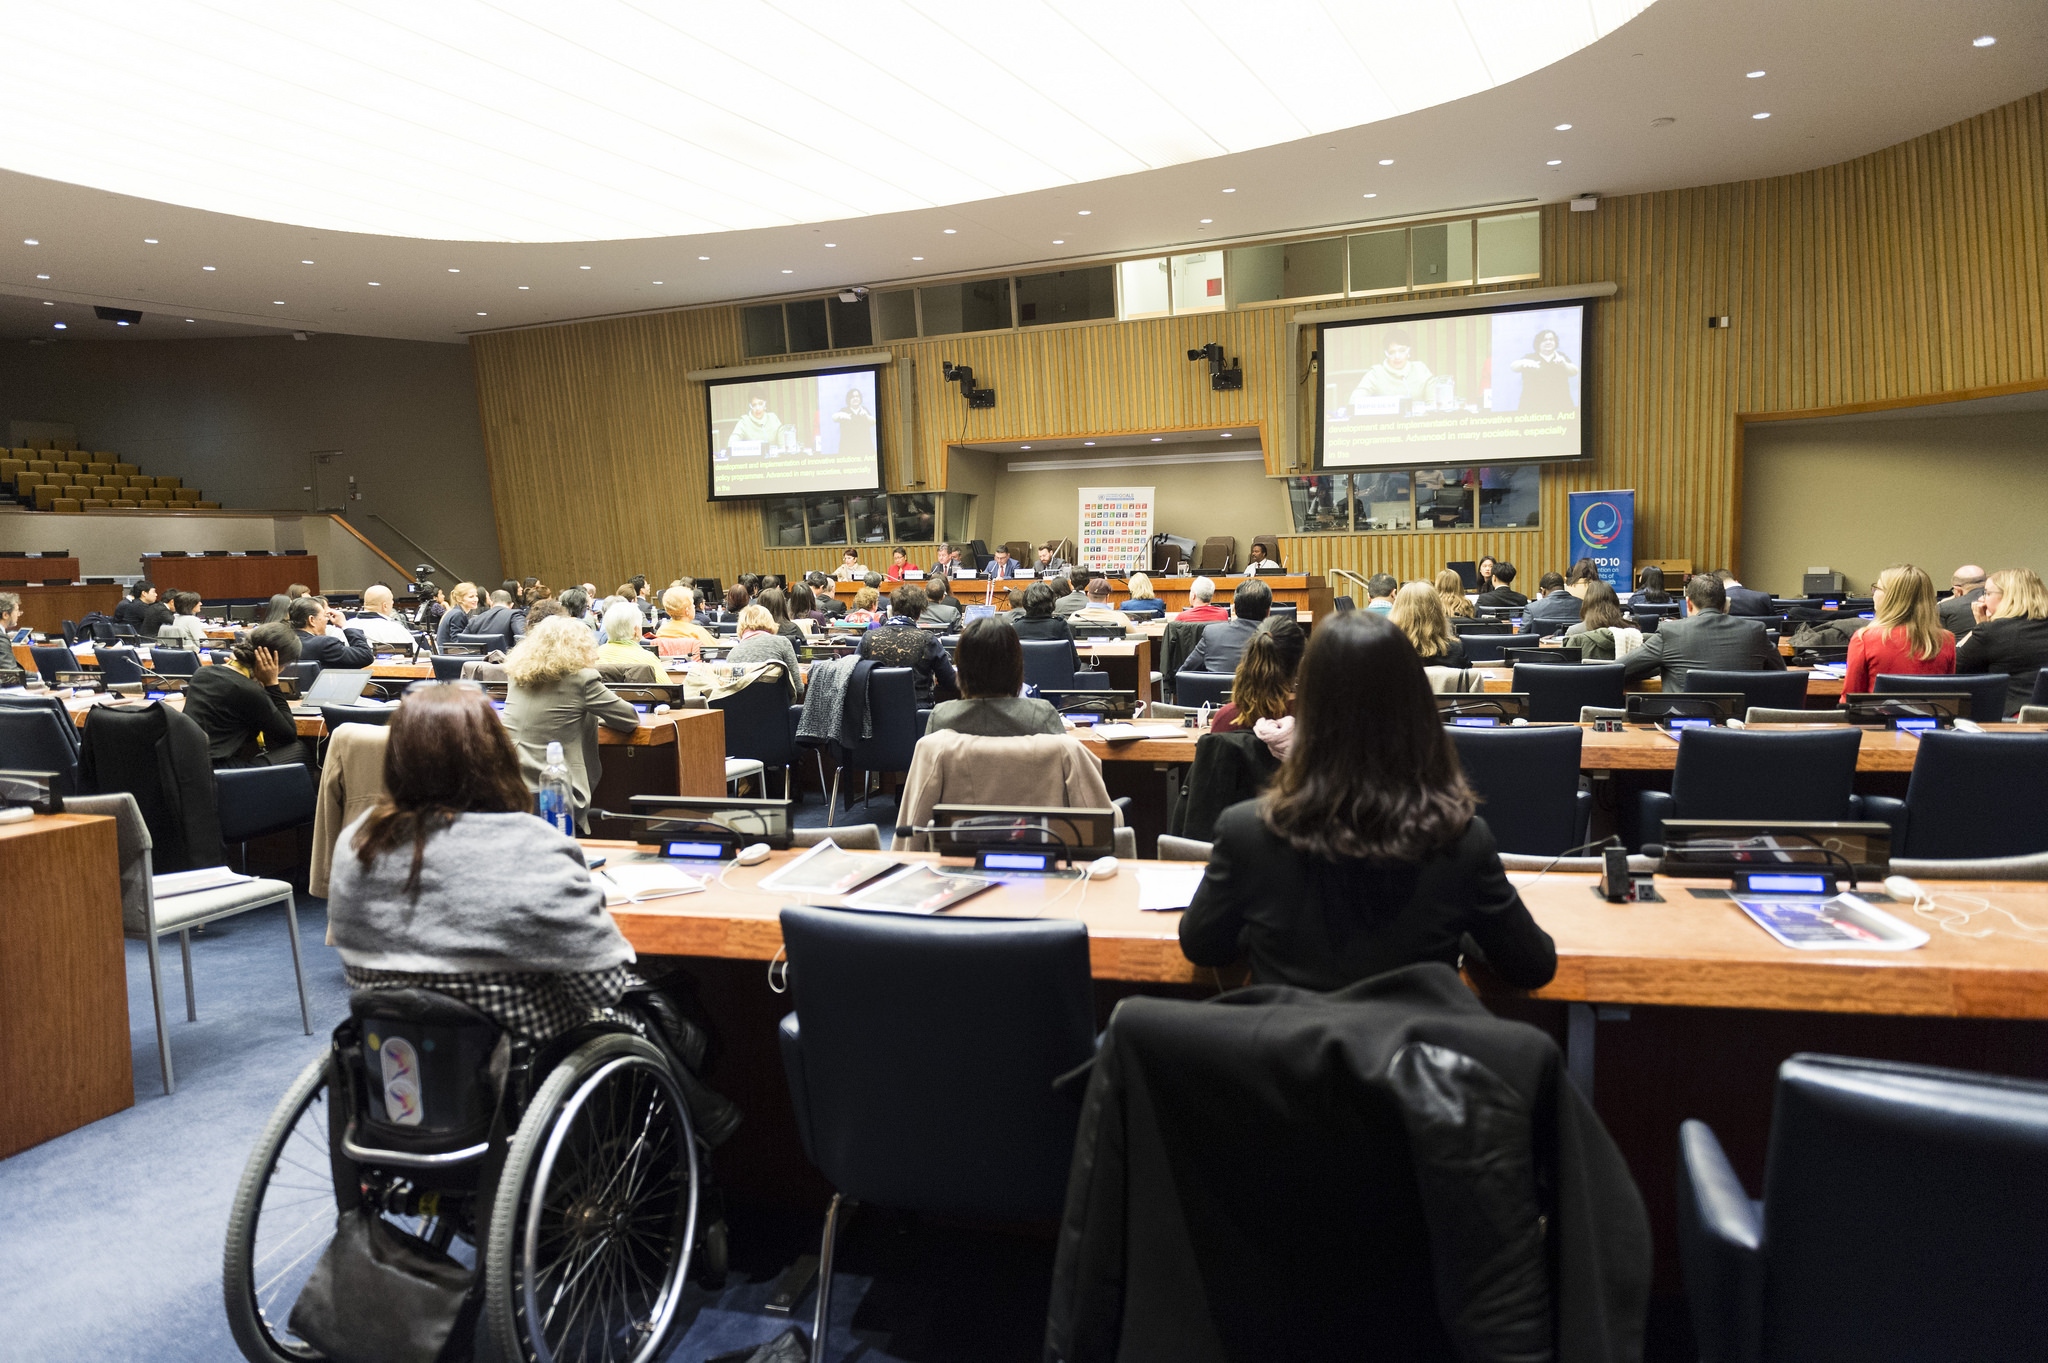 The CRPD - Convention on the Rights of People with Disabilities - meet 